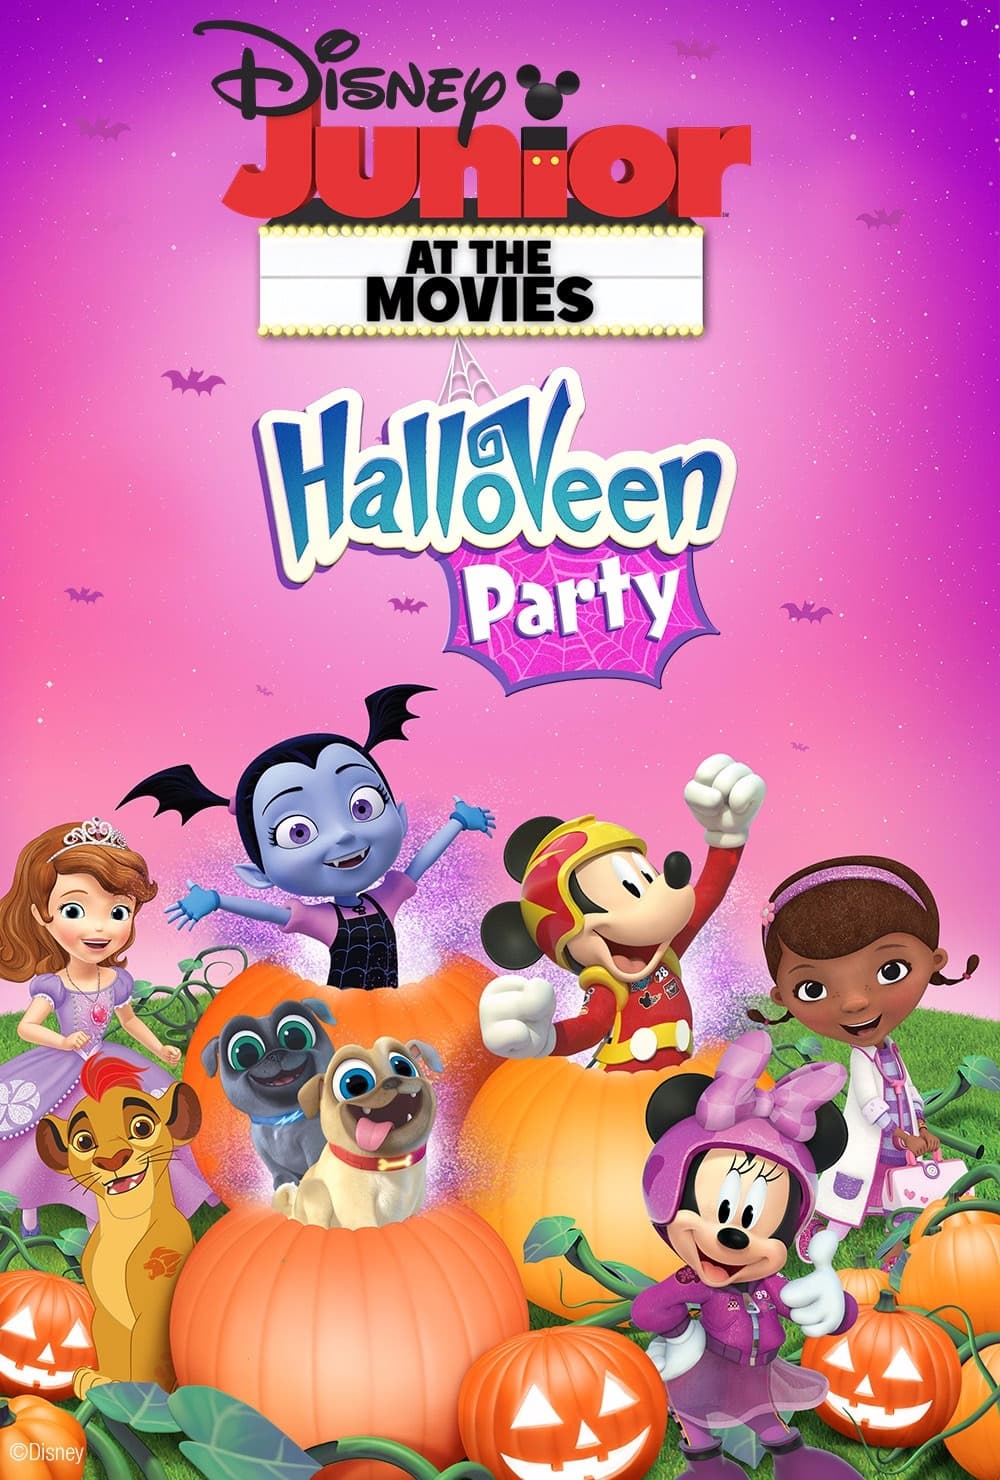 Disney Junior at the Movies: HalloVeen Party